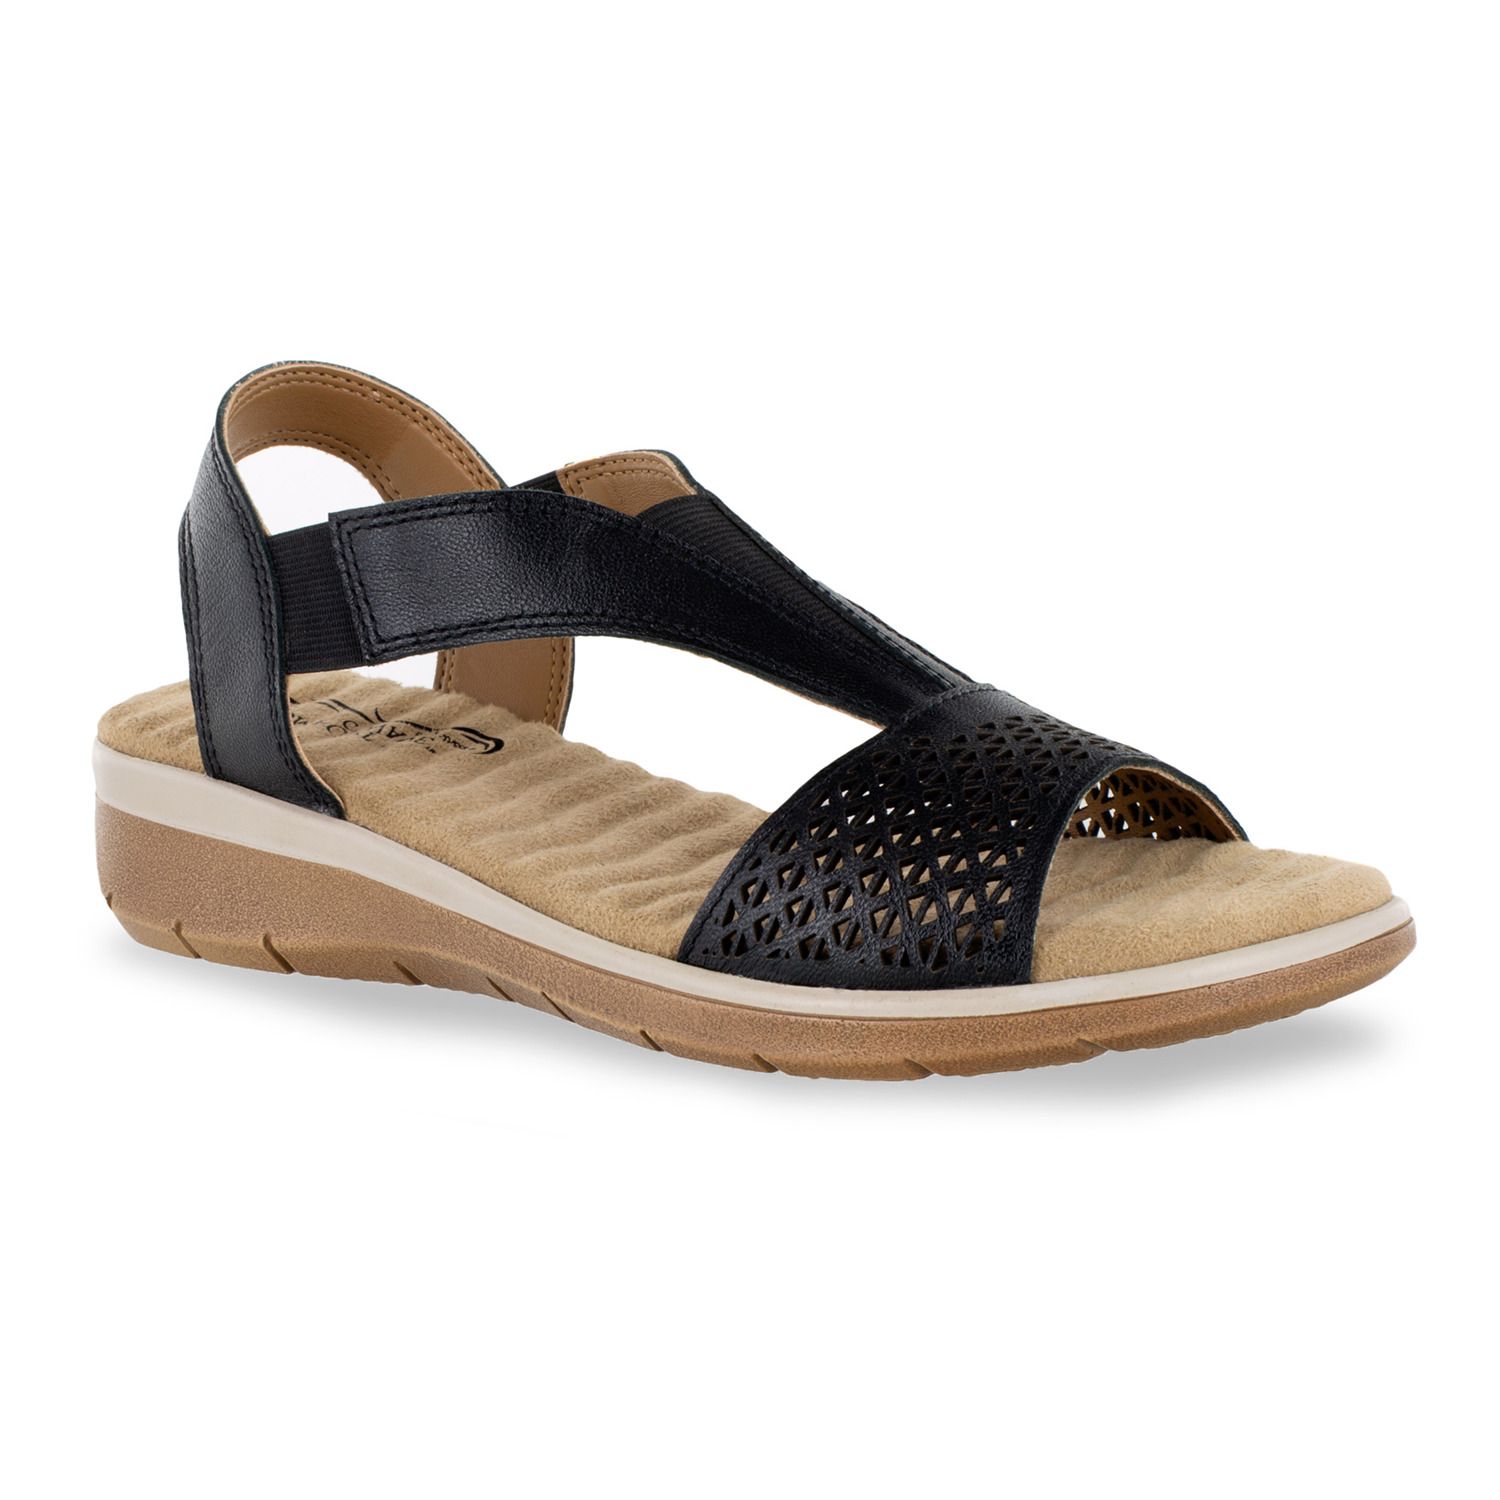 Image for Easy Street Marley Comfort Wave Women's Leather Sandals at Kohl's.